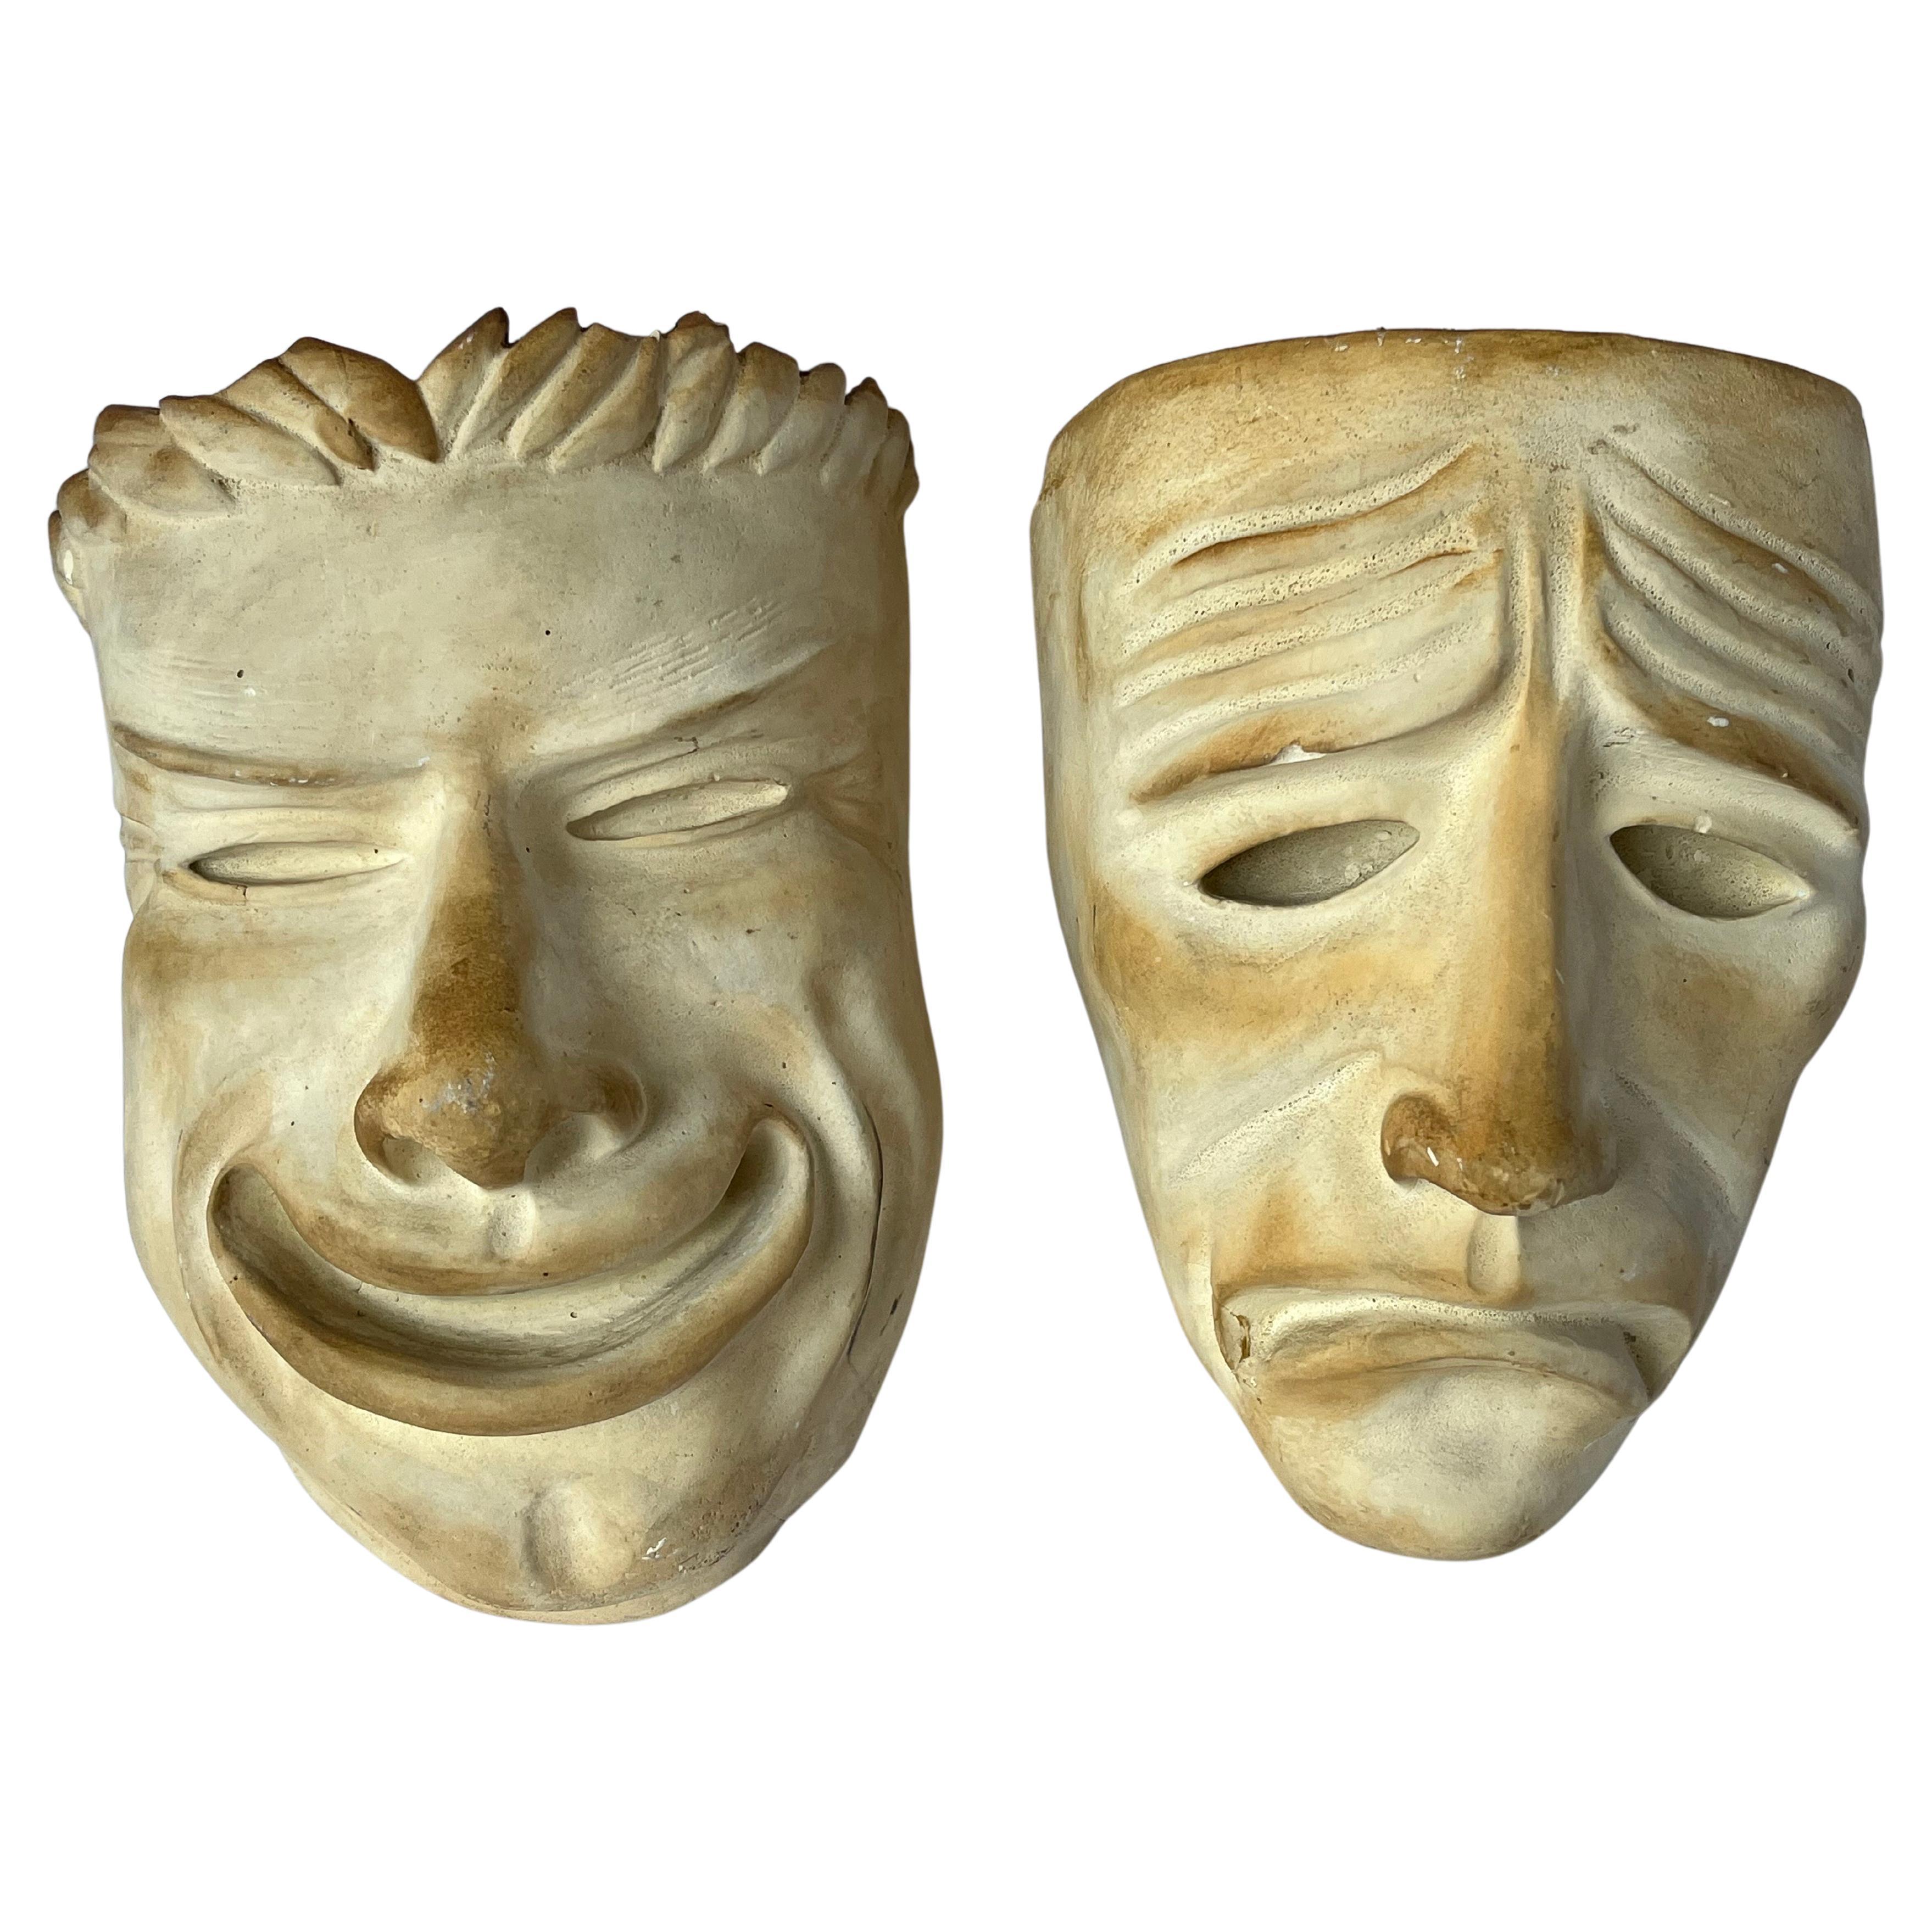 https://a.1stdibscdn.com/fine-almost-life-size-1940s-plaster-comedy-and-tragedy-theater-masks-sculptures-for-sale/f_72402/f_347179921686565706398/f_34717992_1686565708193_bg_processed.jpg